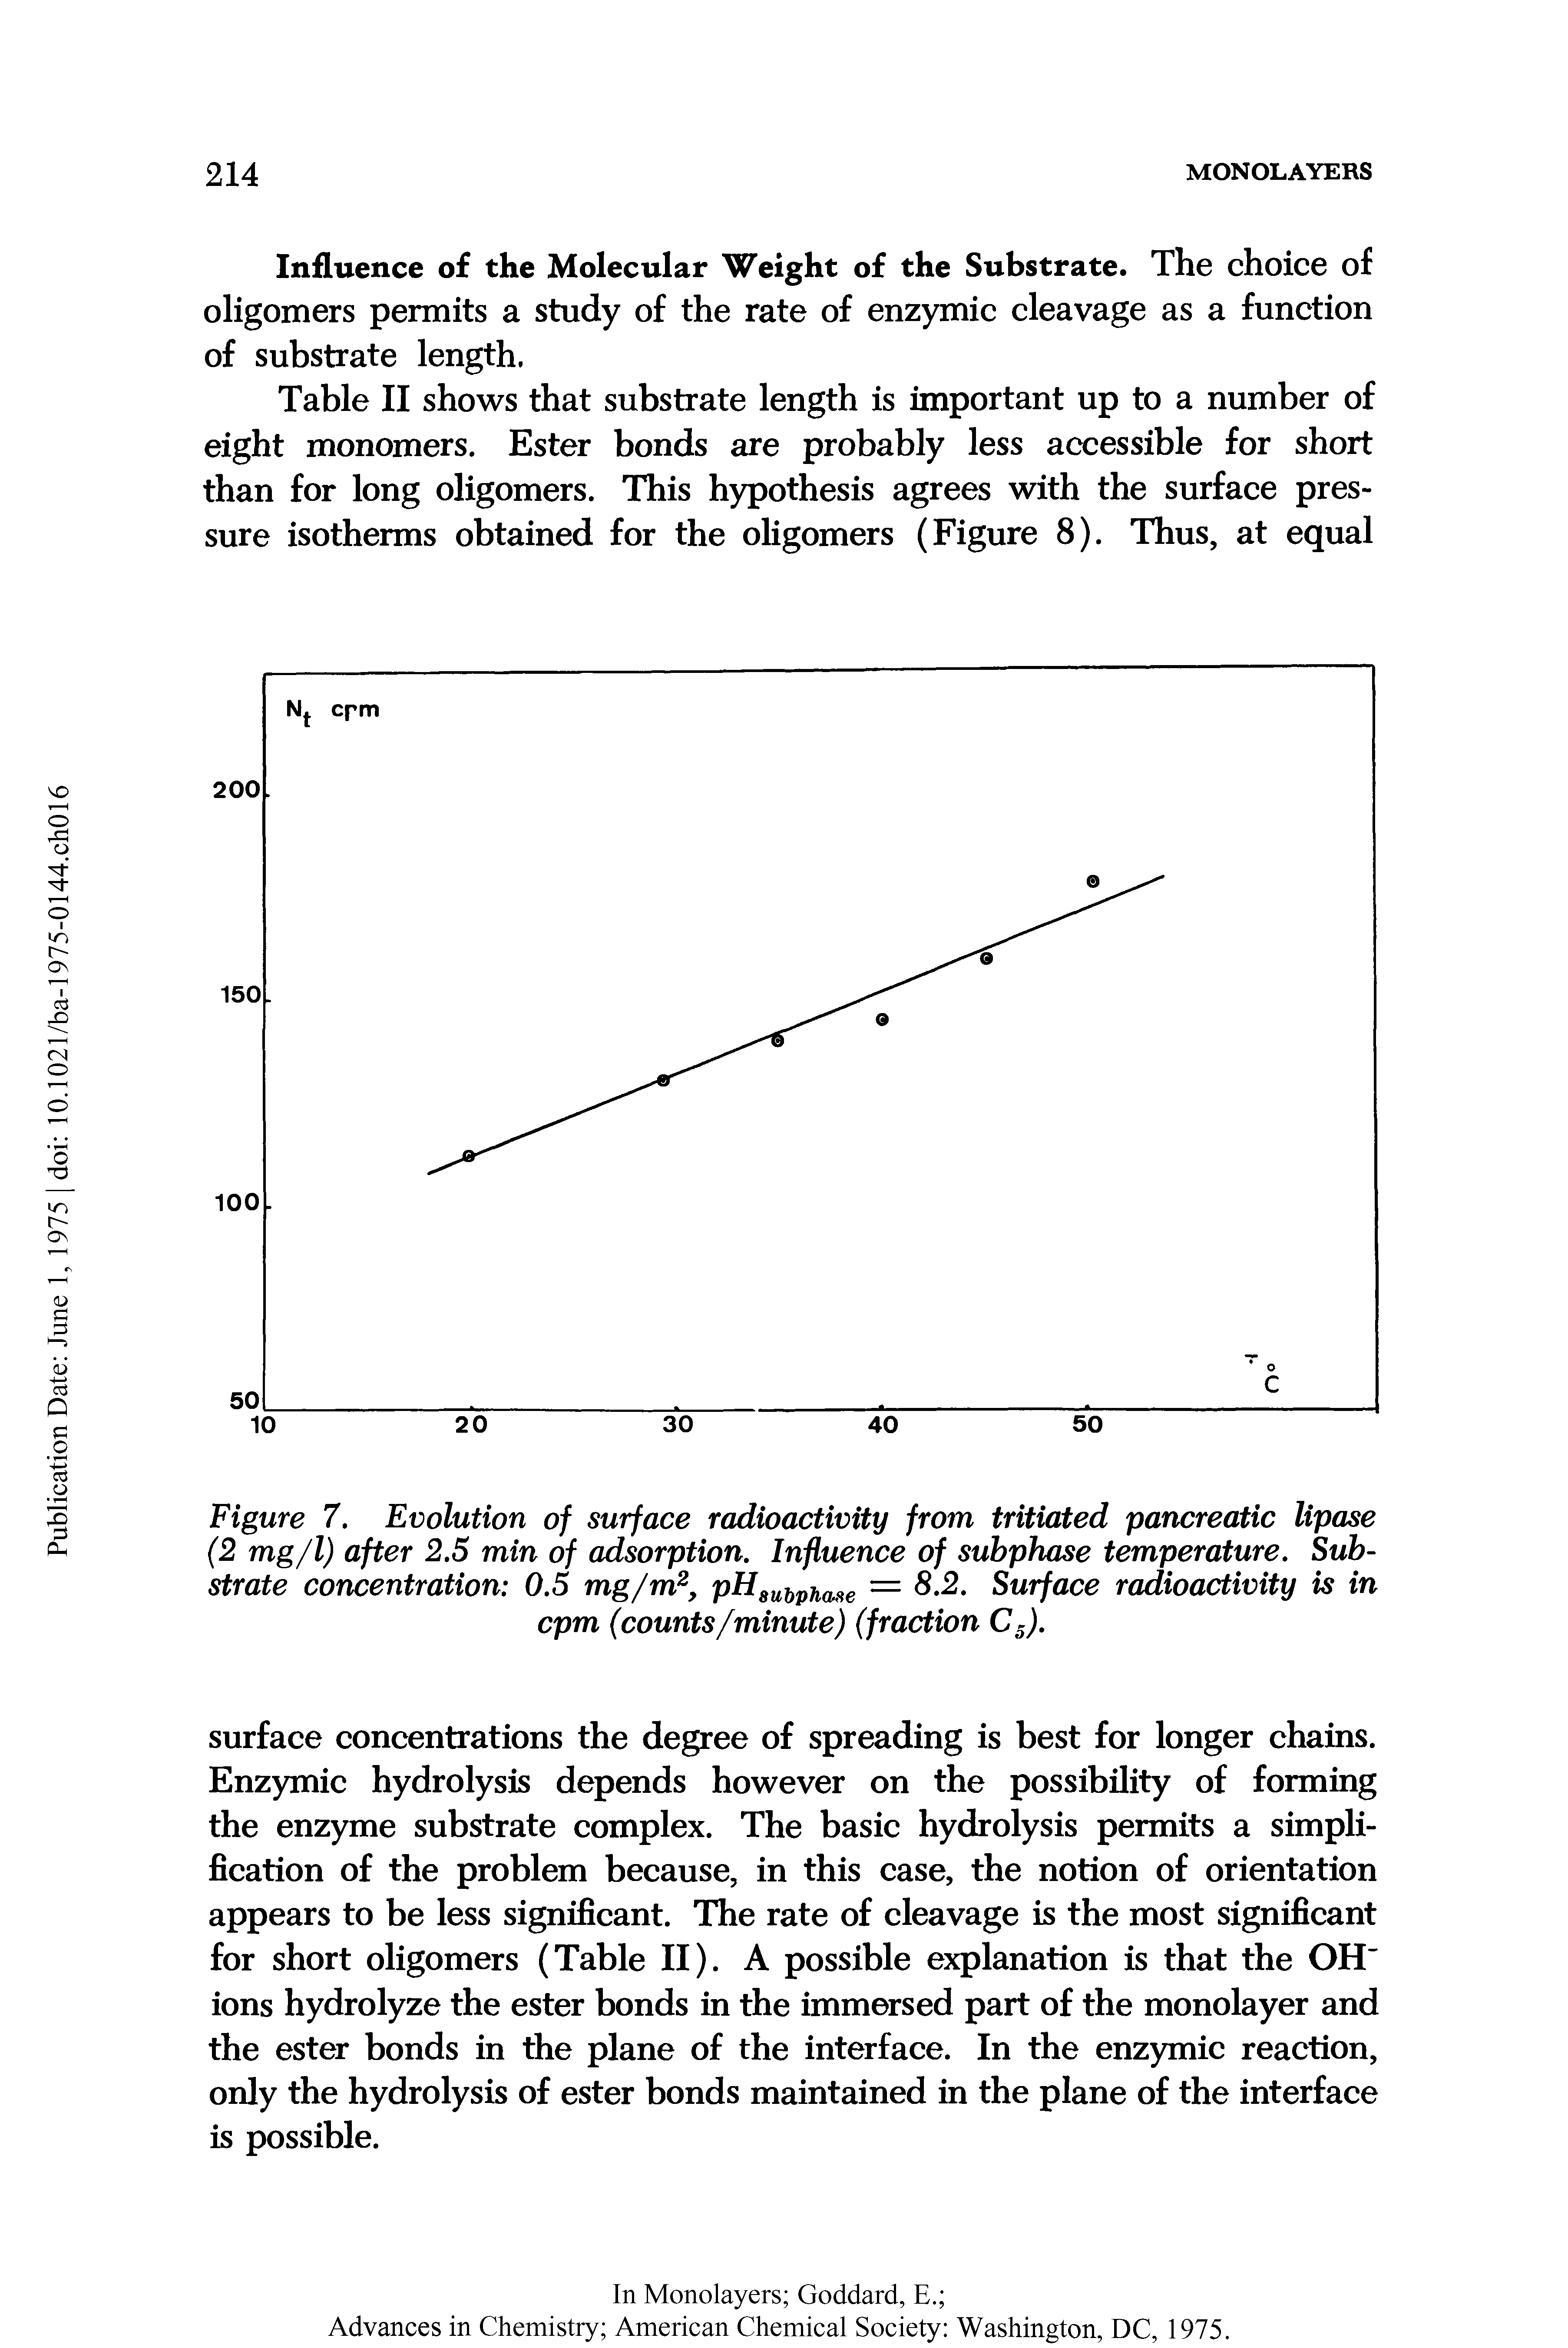 Figure 7. Evolution of surface radioactivity from tritiated pancreatic lipase (2 mg/l) after 2.5 min of adsorption. Influence of subphase temperature. Substrate concentration 0.5 mg/m2, pH8UbphQf8e = 8.2. Surface radioactivity is in cpm (counts/minute) (fraction C5).